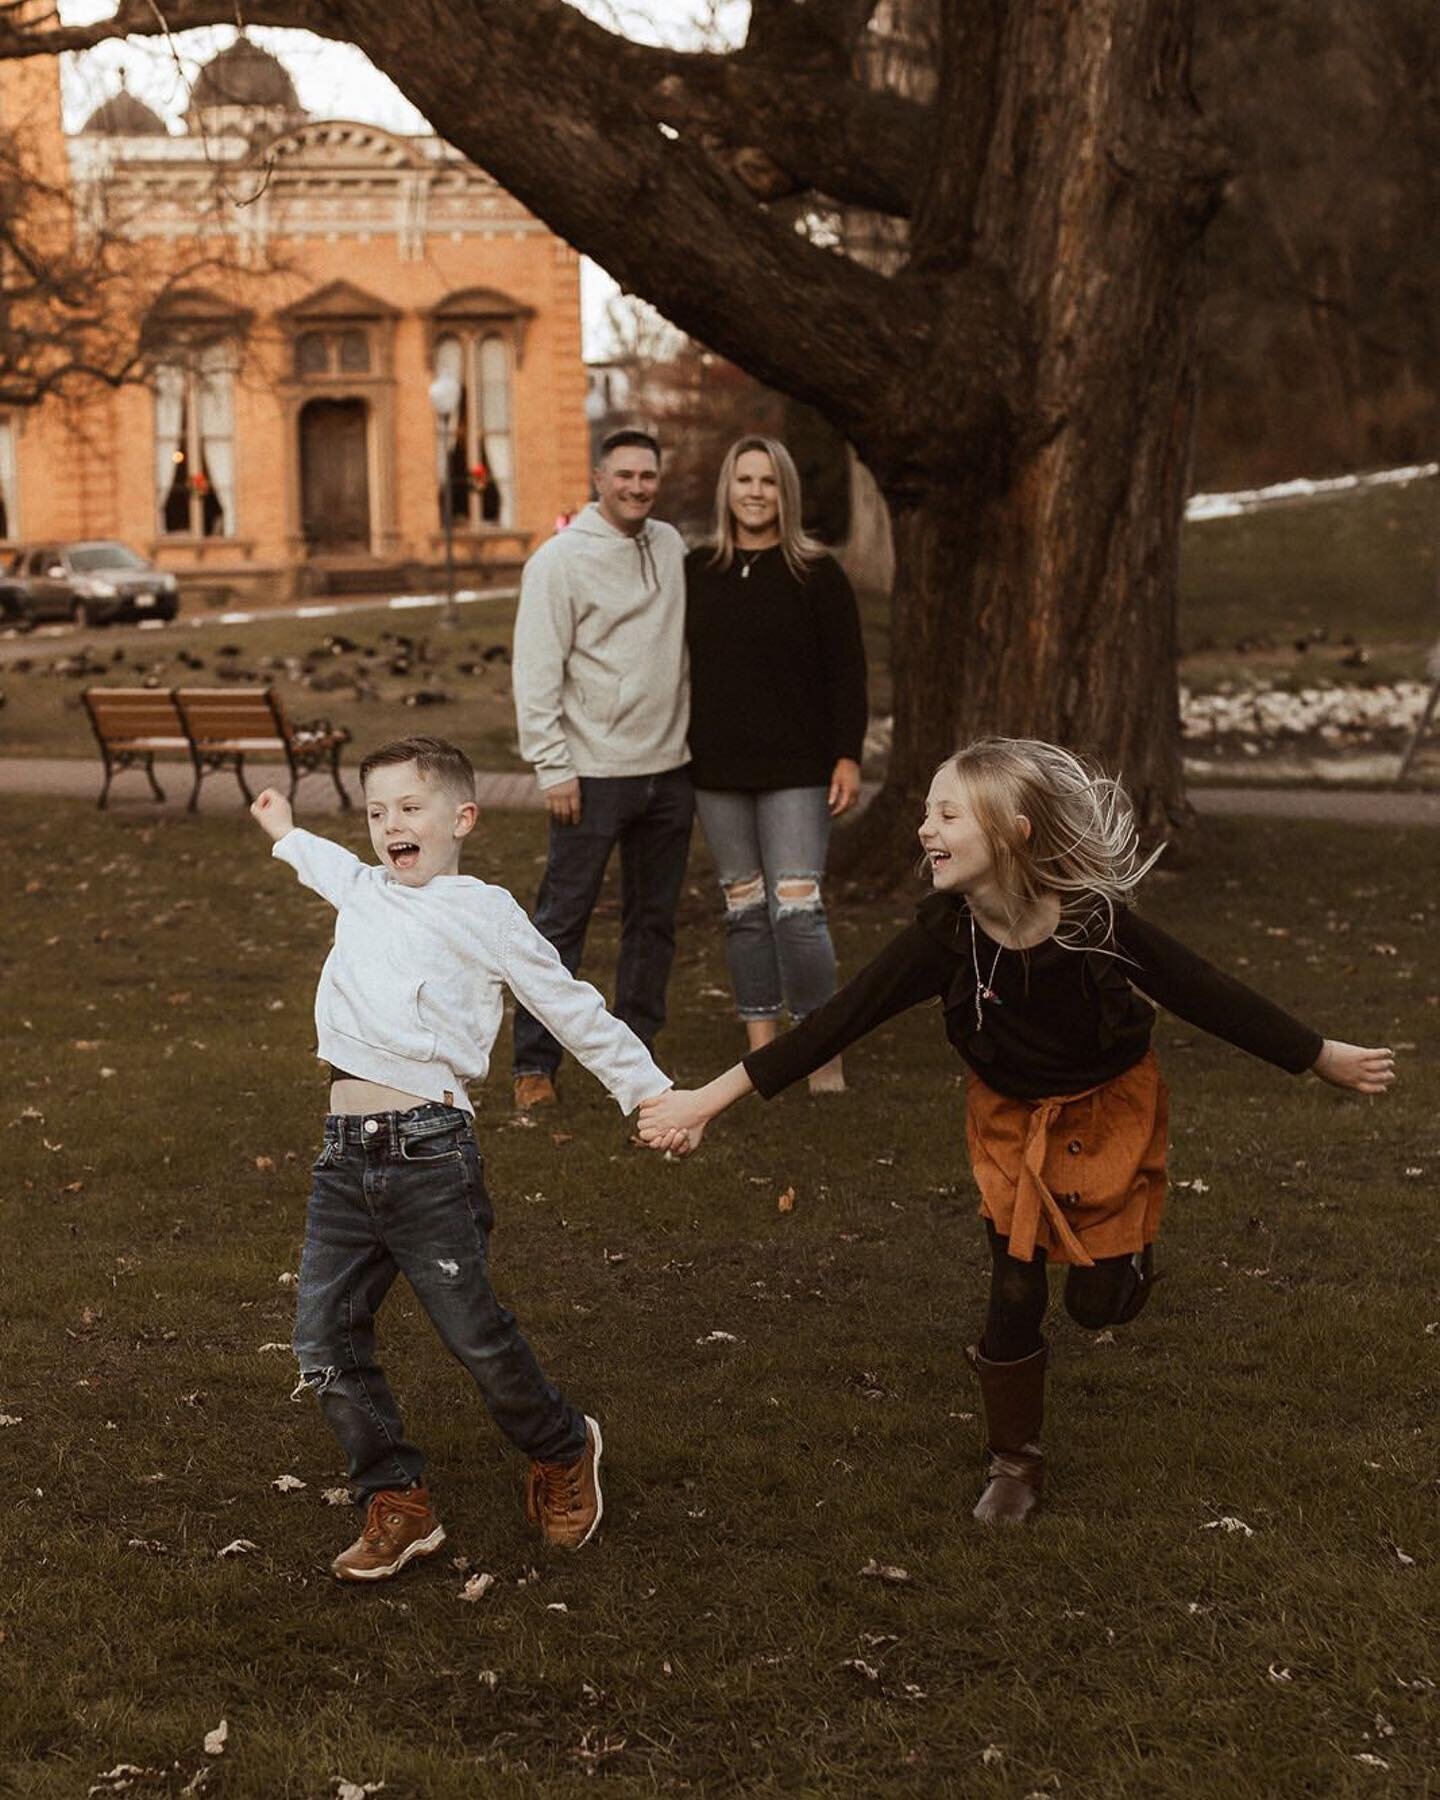 Playful family sessions are my favorite! Most families don&rsquo;t spend their time together standing still fake-cheezing so why should their family photos look like that? After every family session I shoot, I leave hoping I was able to capture the t